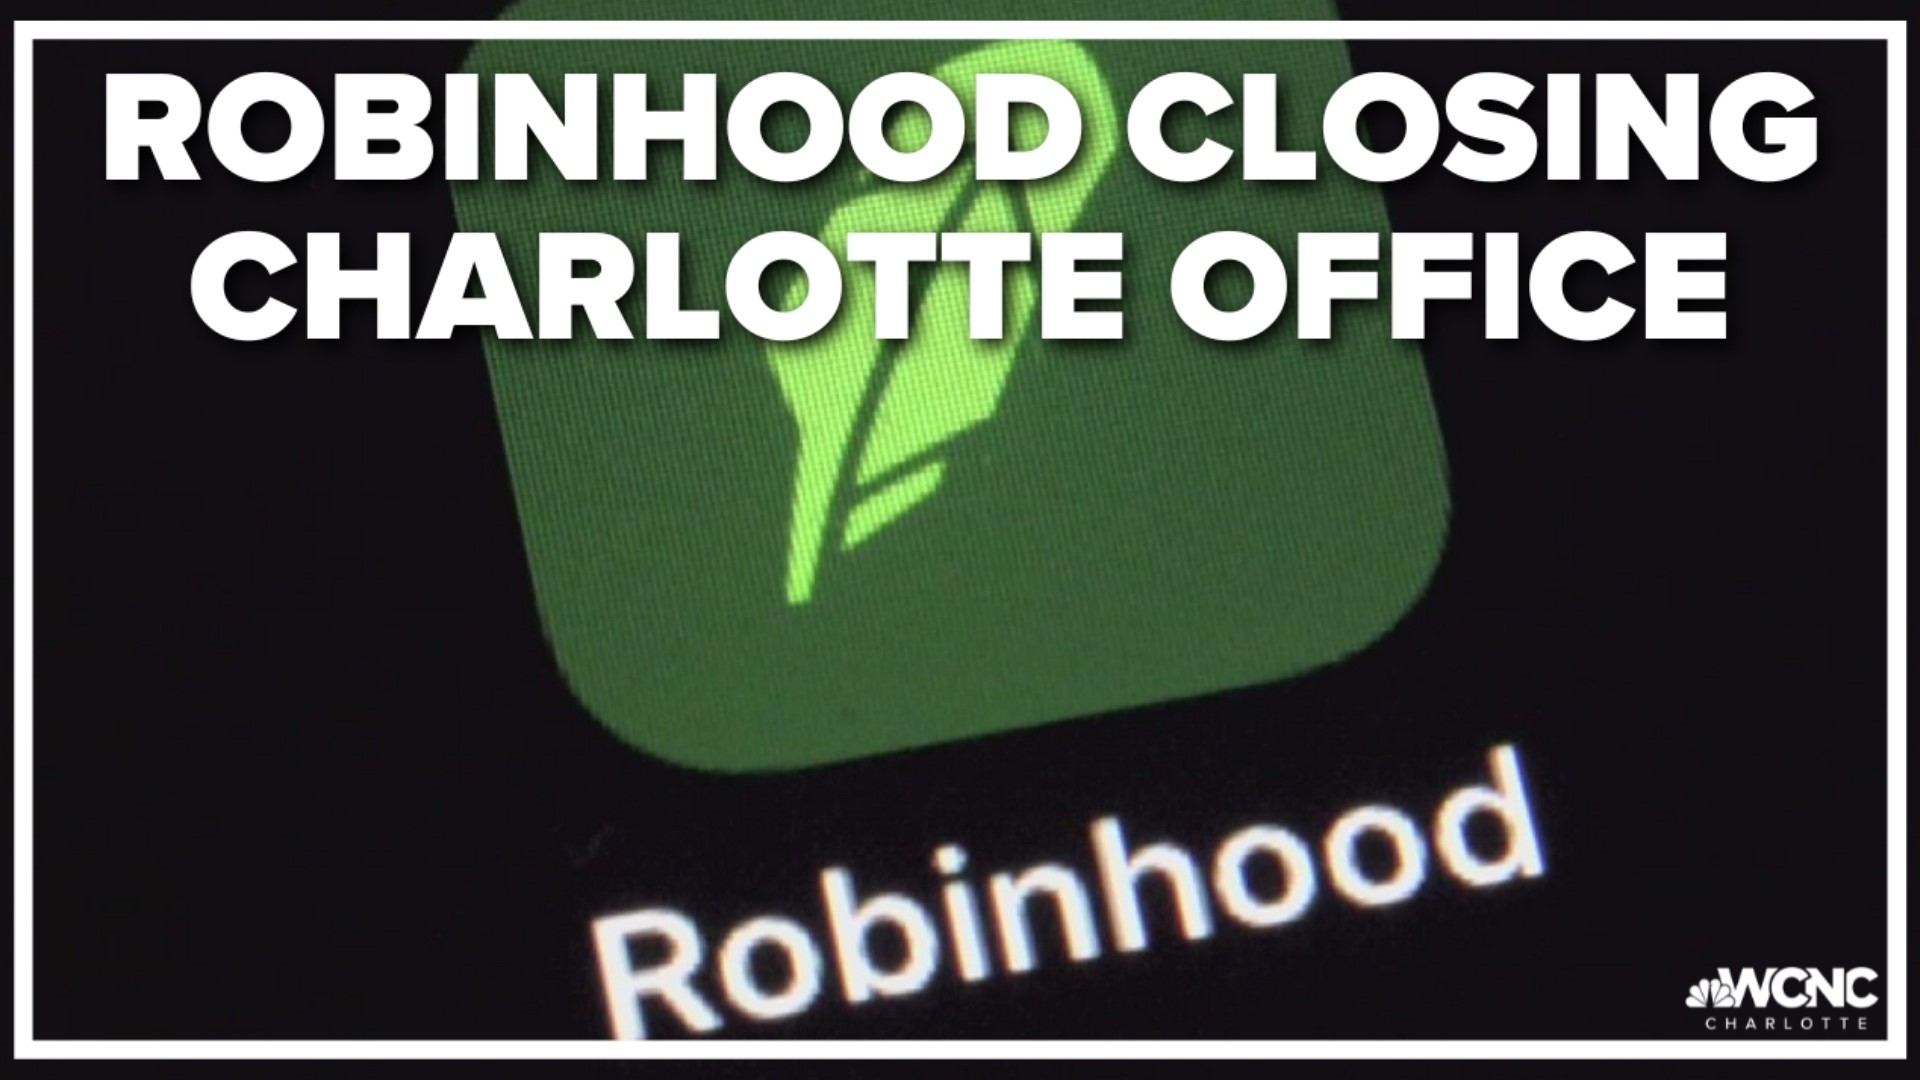 Finance company Robinhood is closing their Charlotte location. The popular investment platform announced that it's cutting 23 percent of its employees.